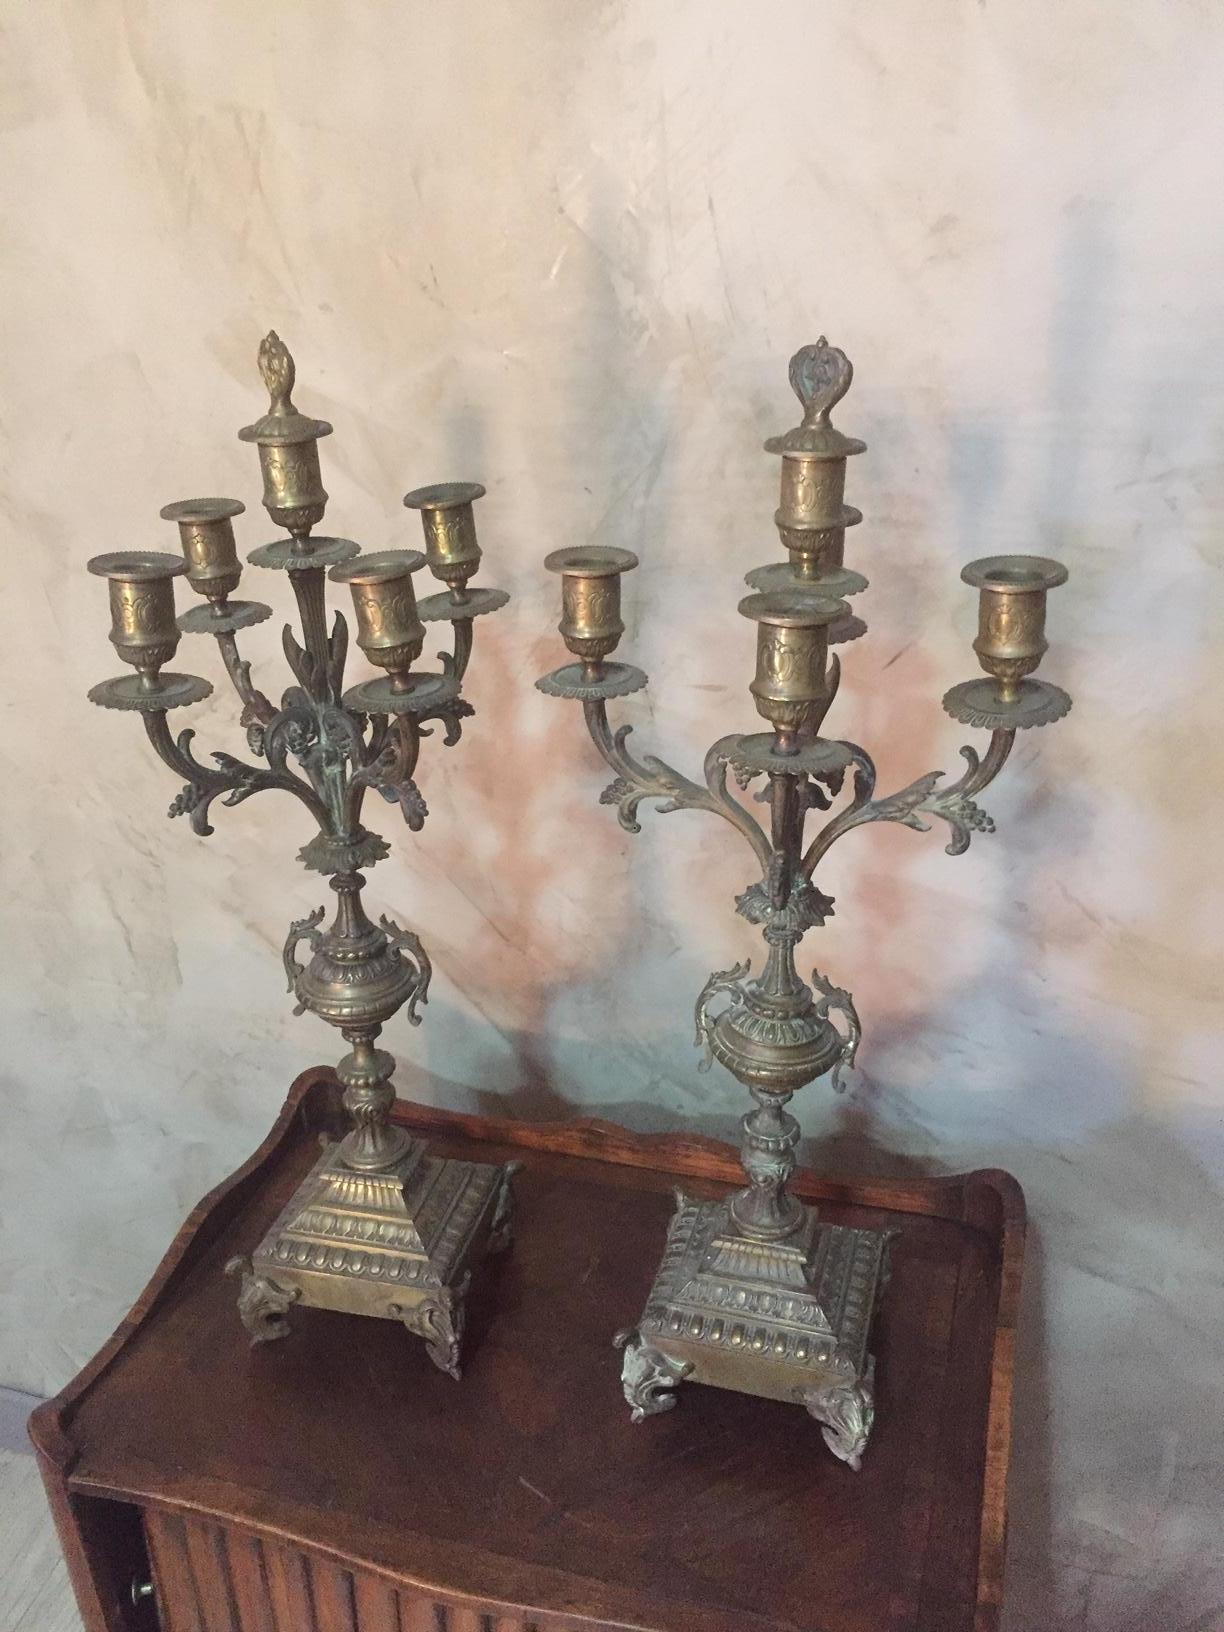 Very elegant early 20th century French bronze candelabra from the 1900s.
Four or five lights with a candle snuffer in the middle.